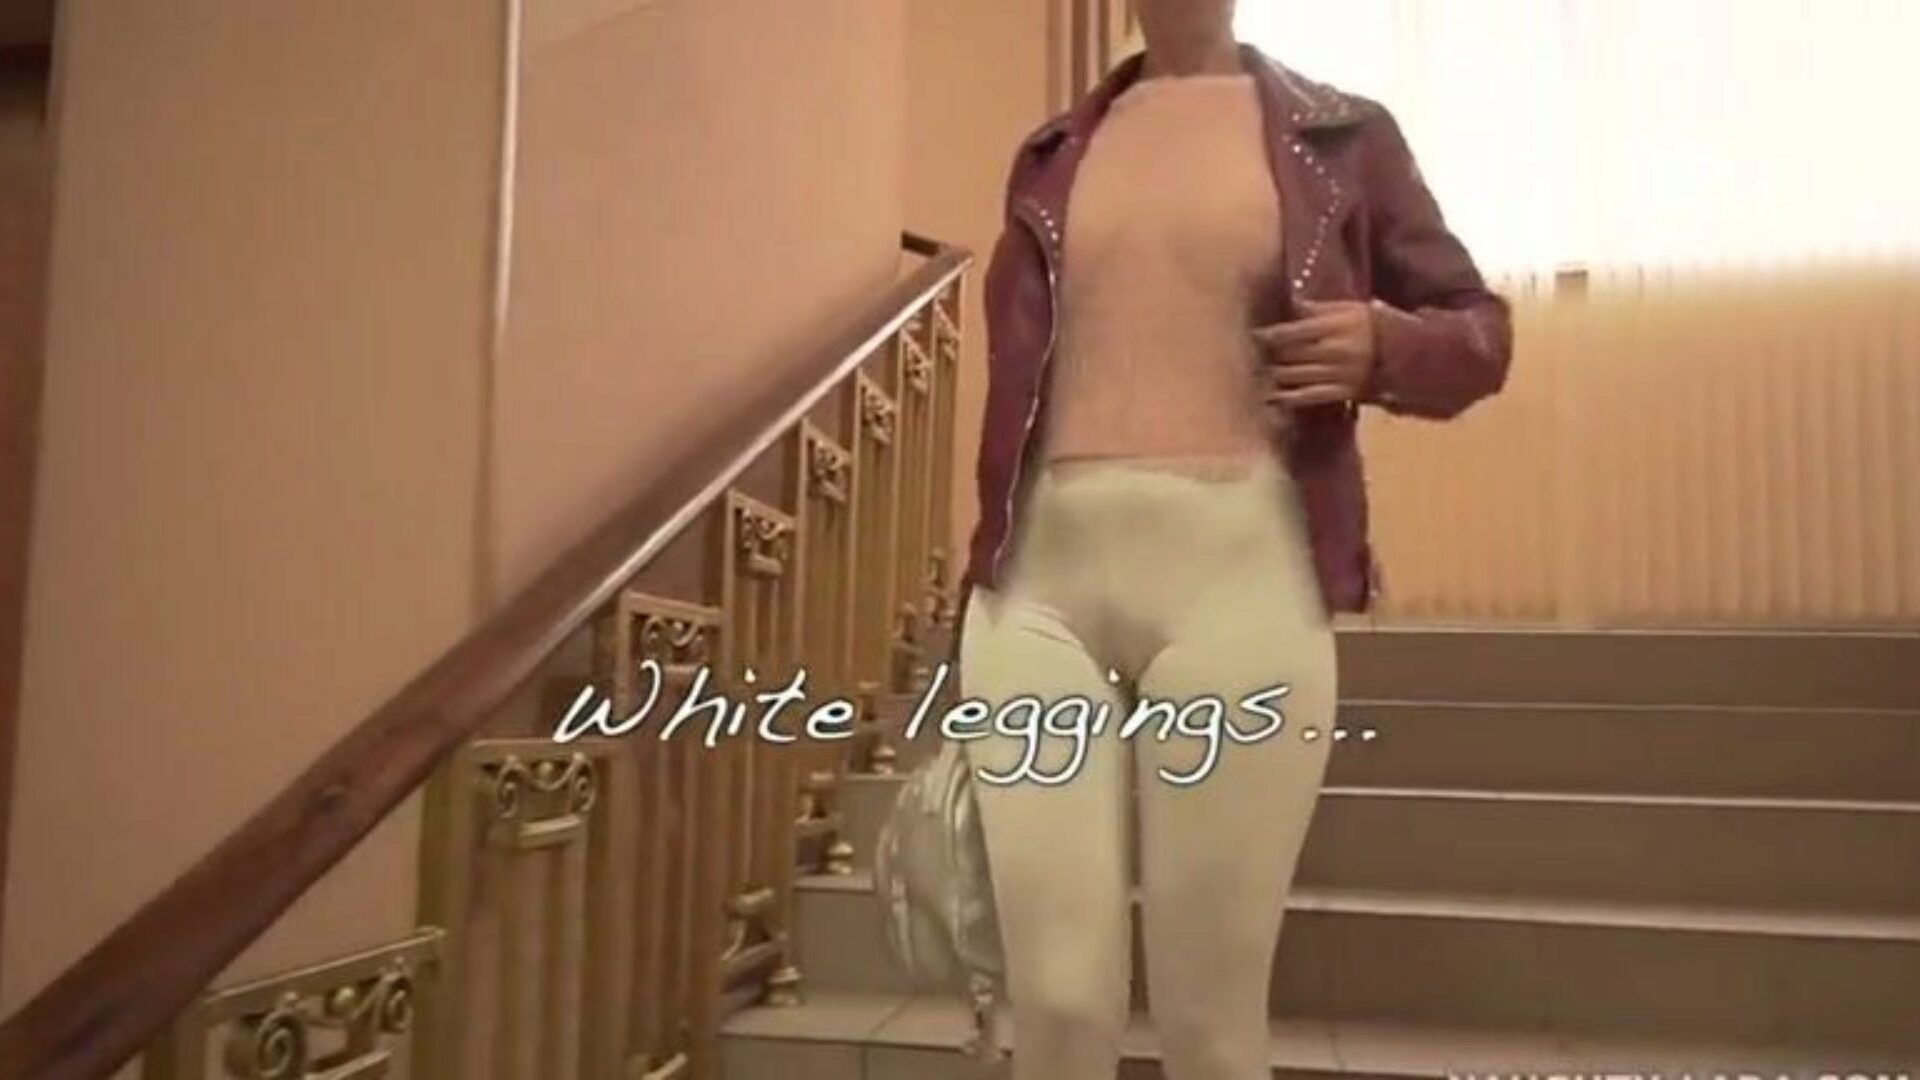 Thin milky taut stretch pants and sheer blouse Did u check out my cameltoe ;)?